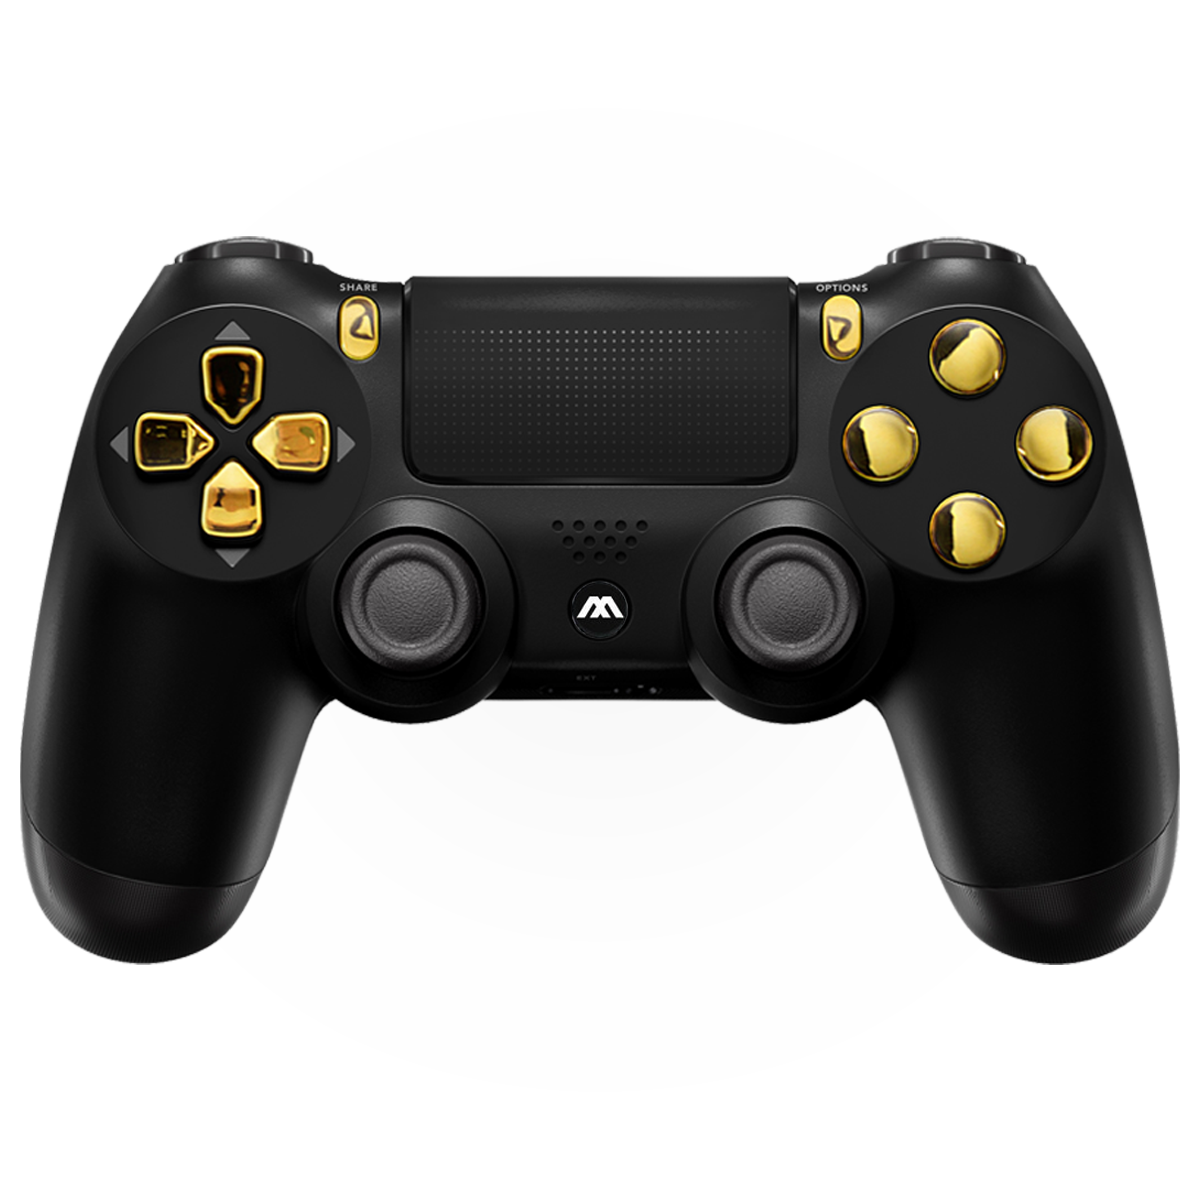 BLACK GOLD EXTREME PS4 SMART PRO MODDED CONTROLLER - ModdedZone